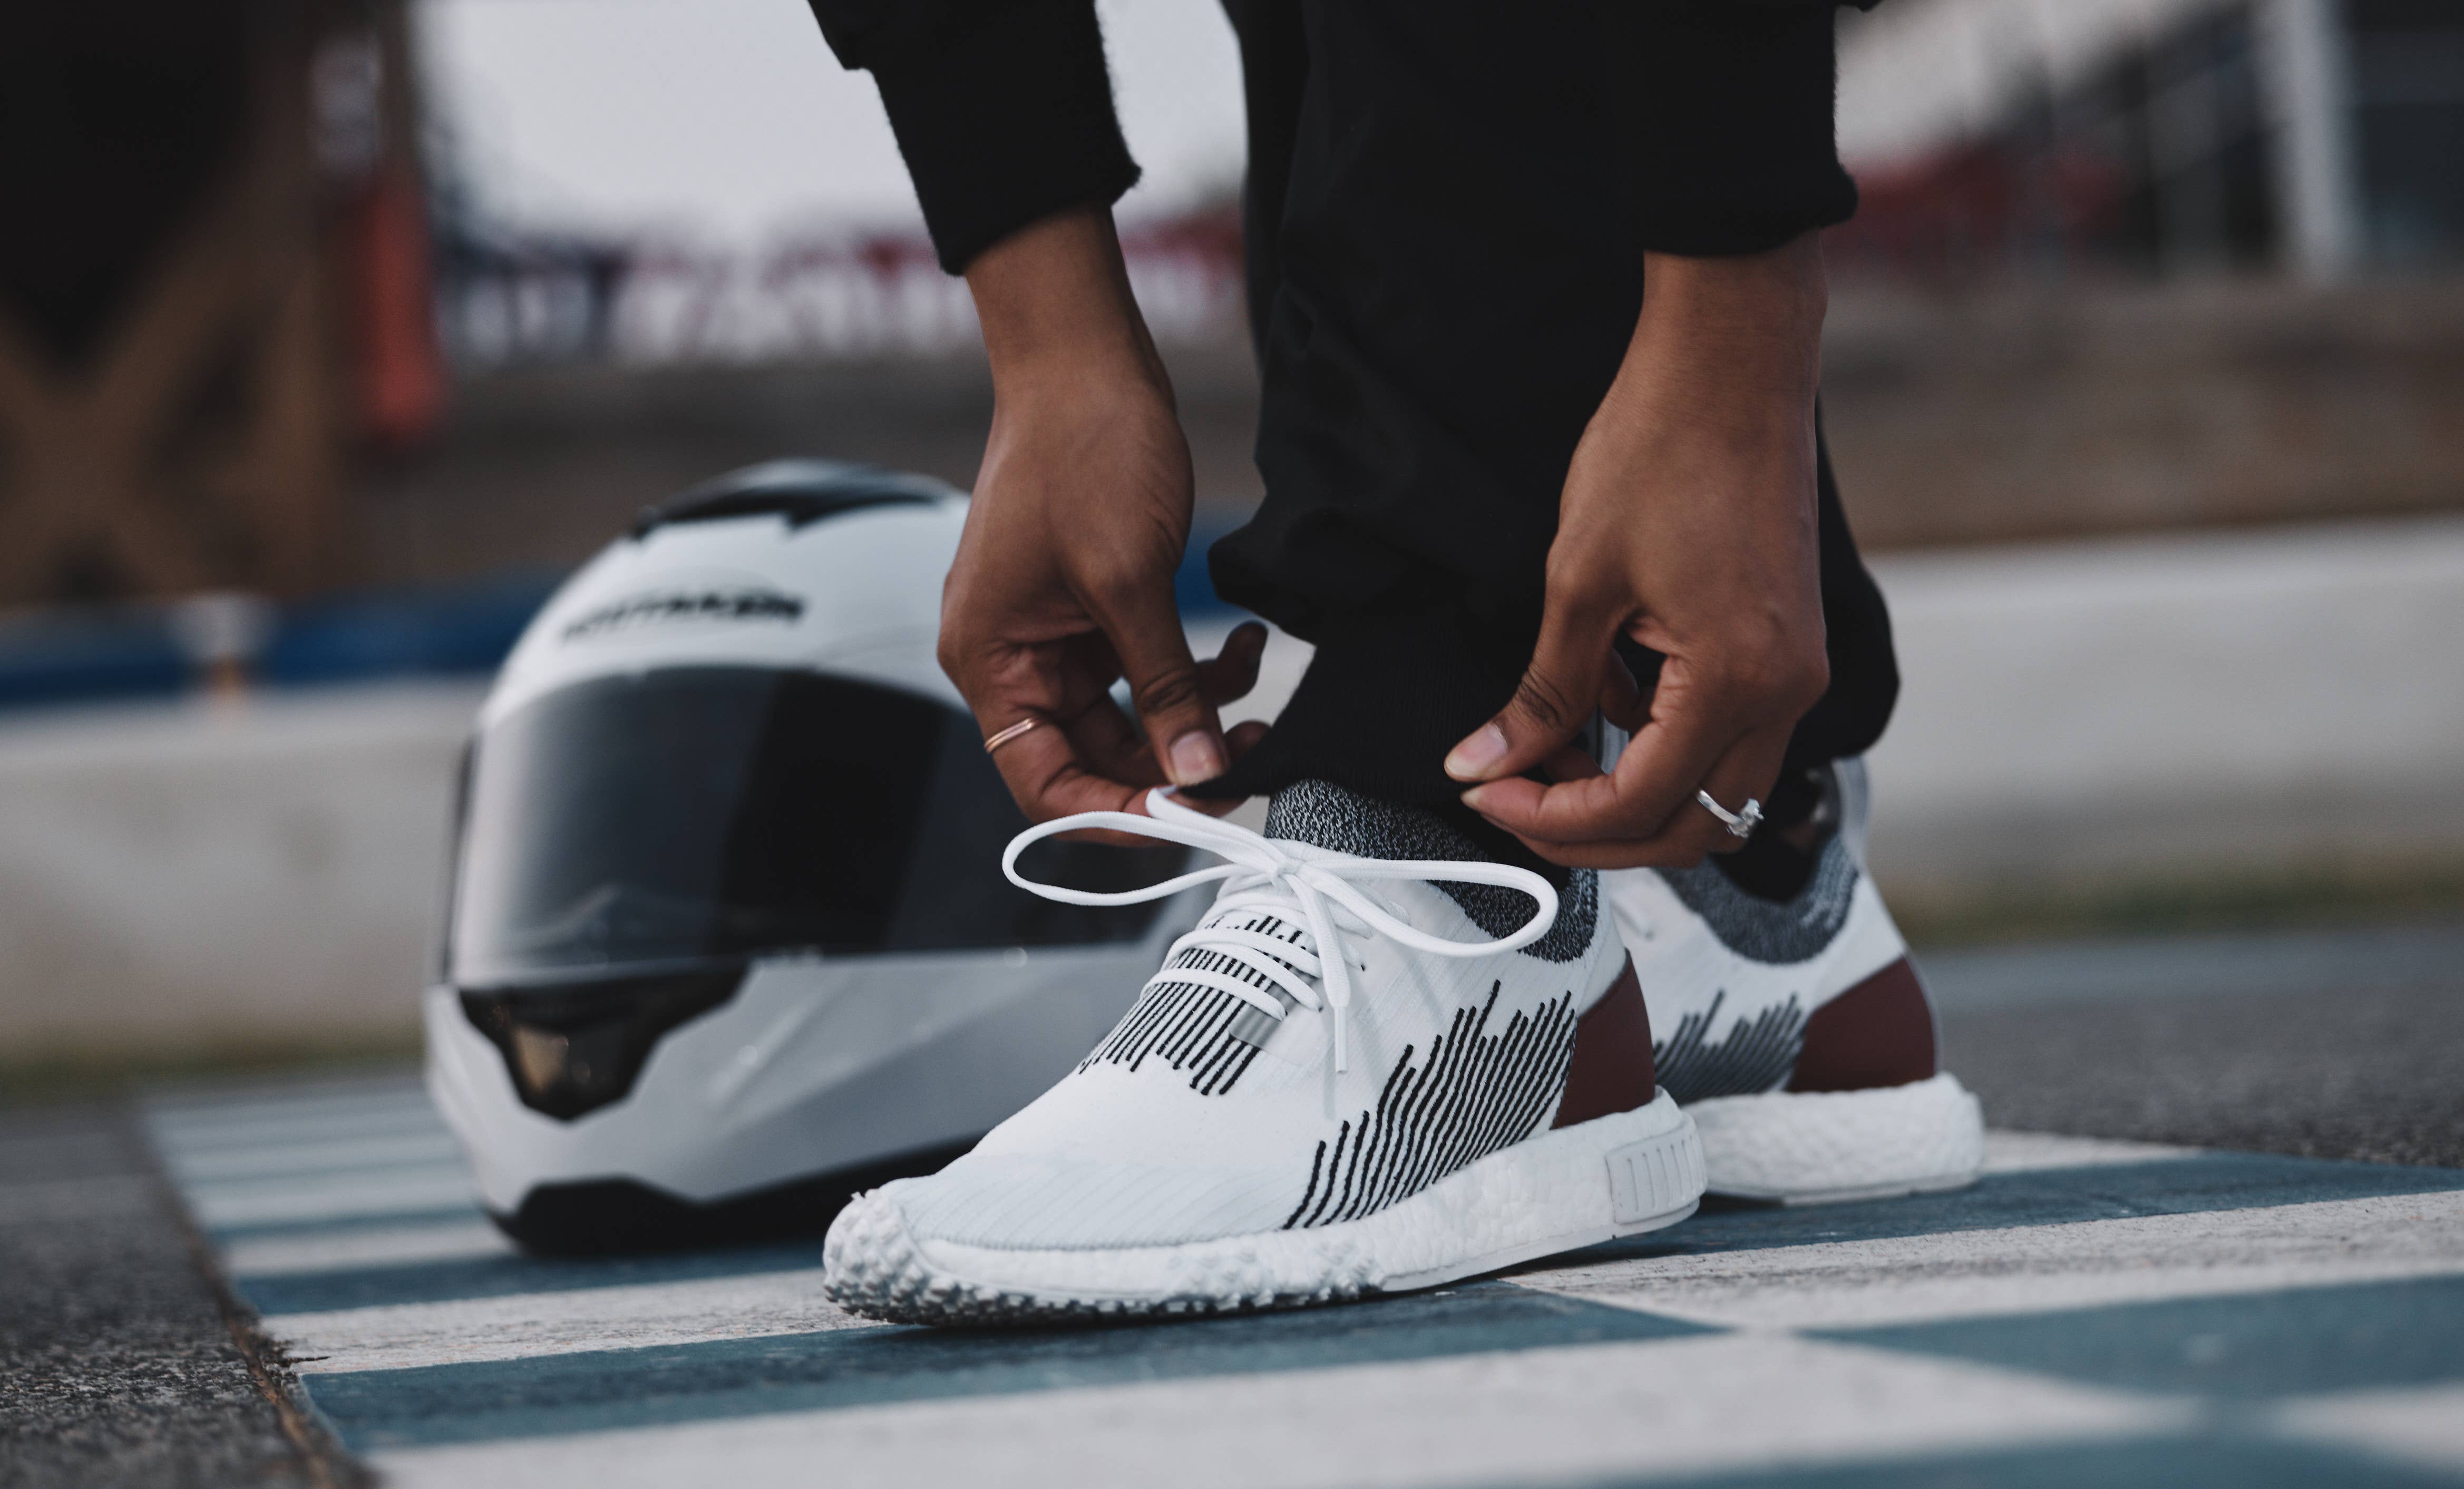 This Adidas Collab Is Inspired by Car Racing